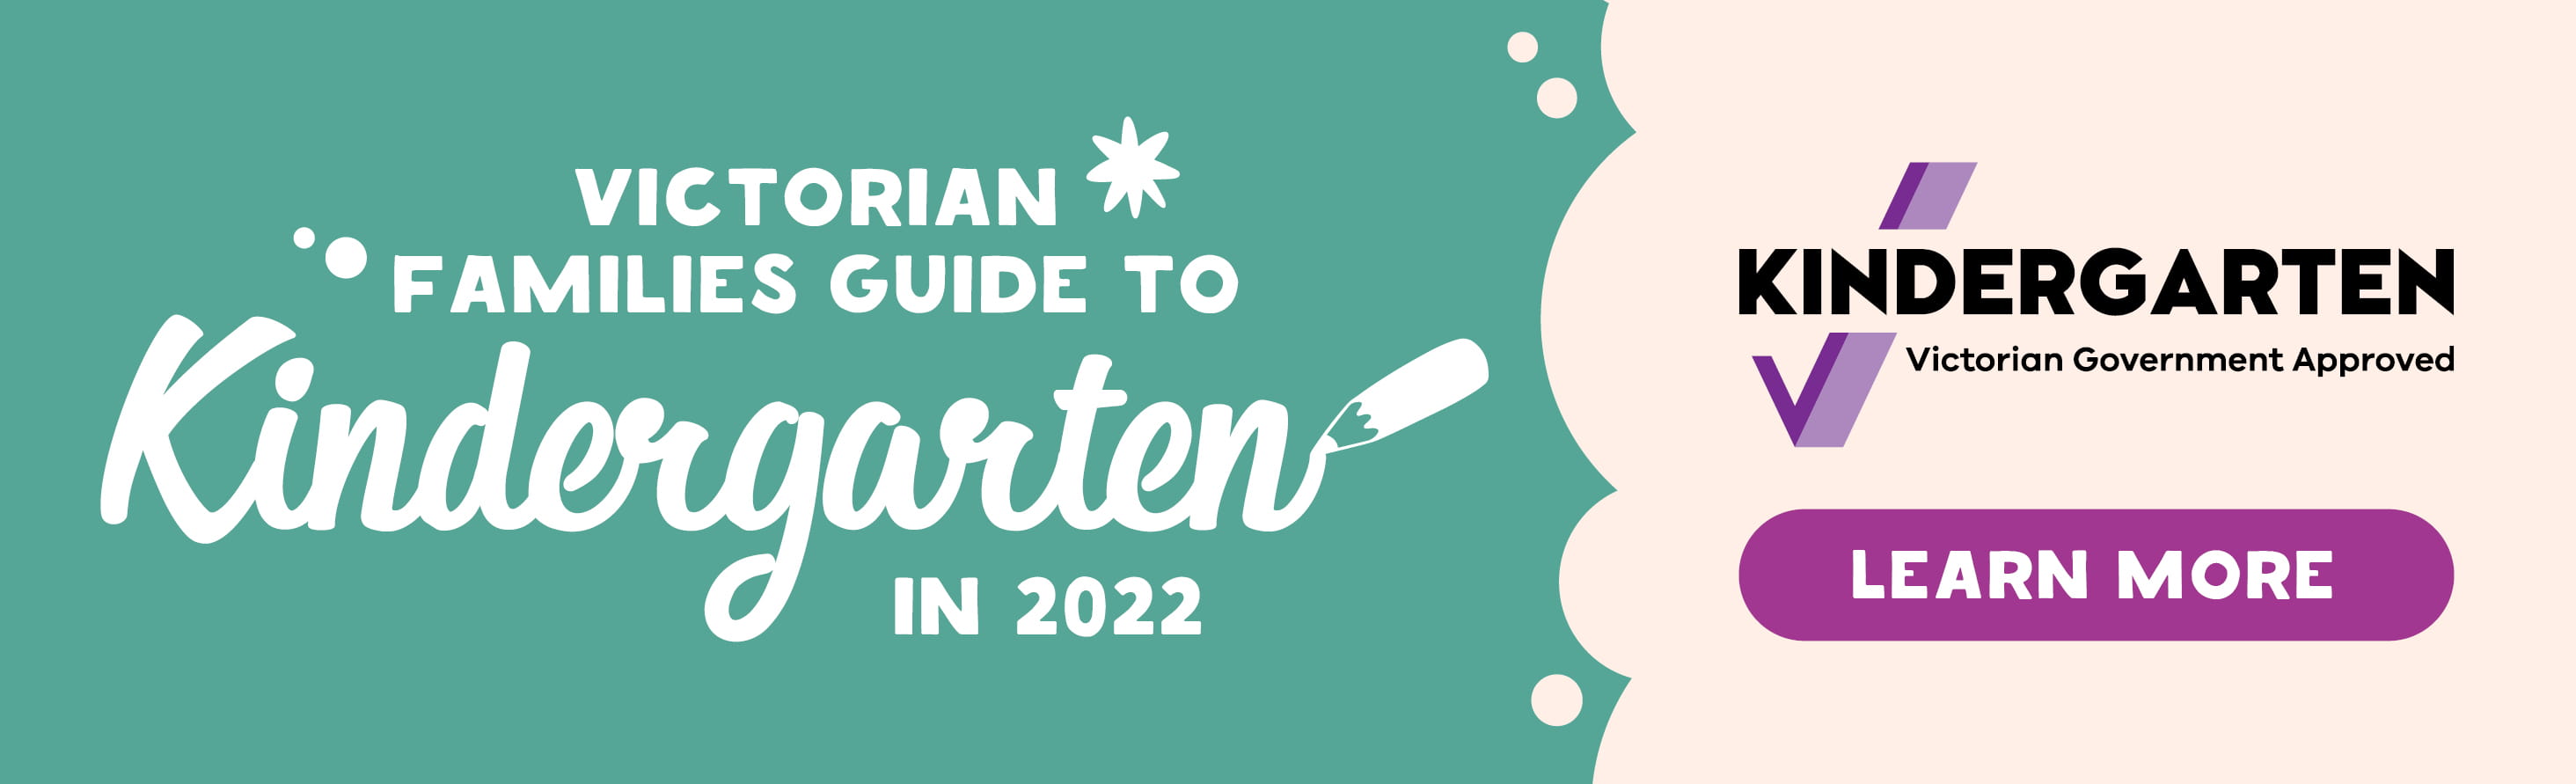 Victorian Families Guide to 3 Year Old Kindergarten in 2022